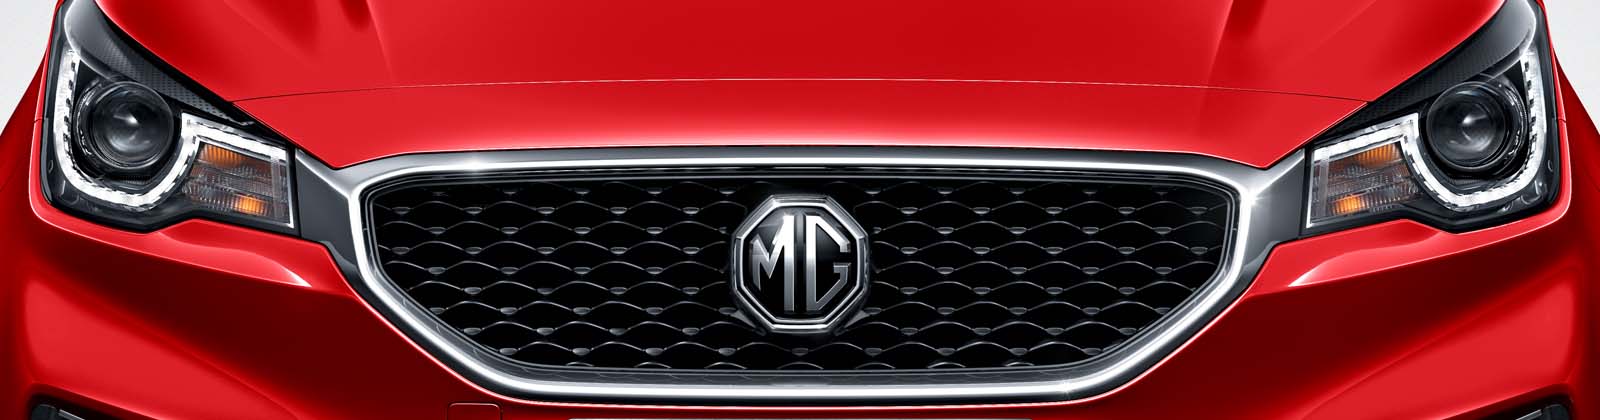 MG3 front grille